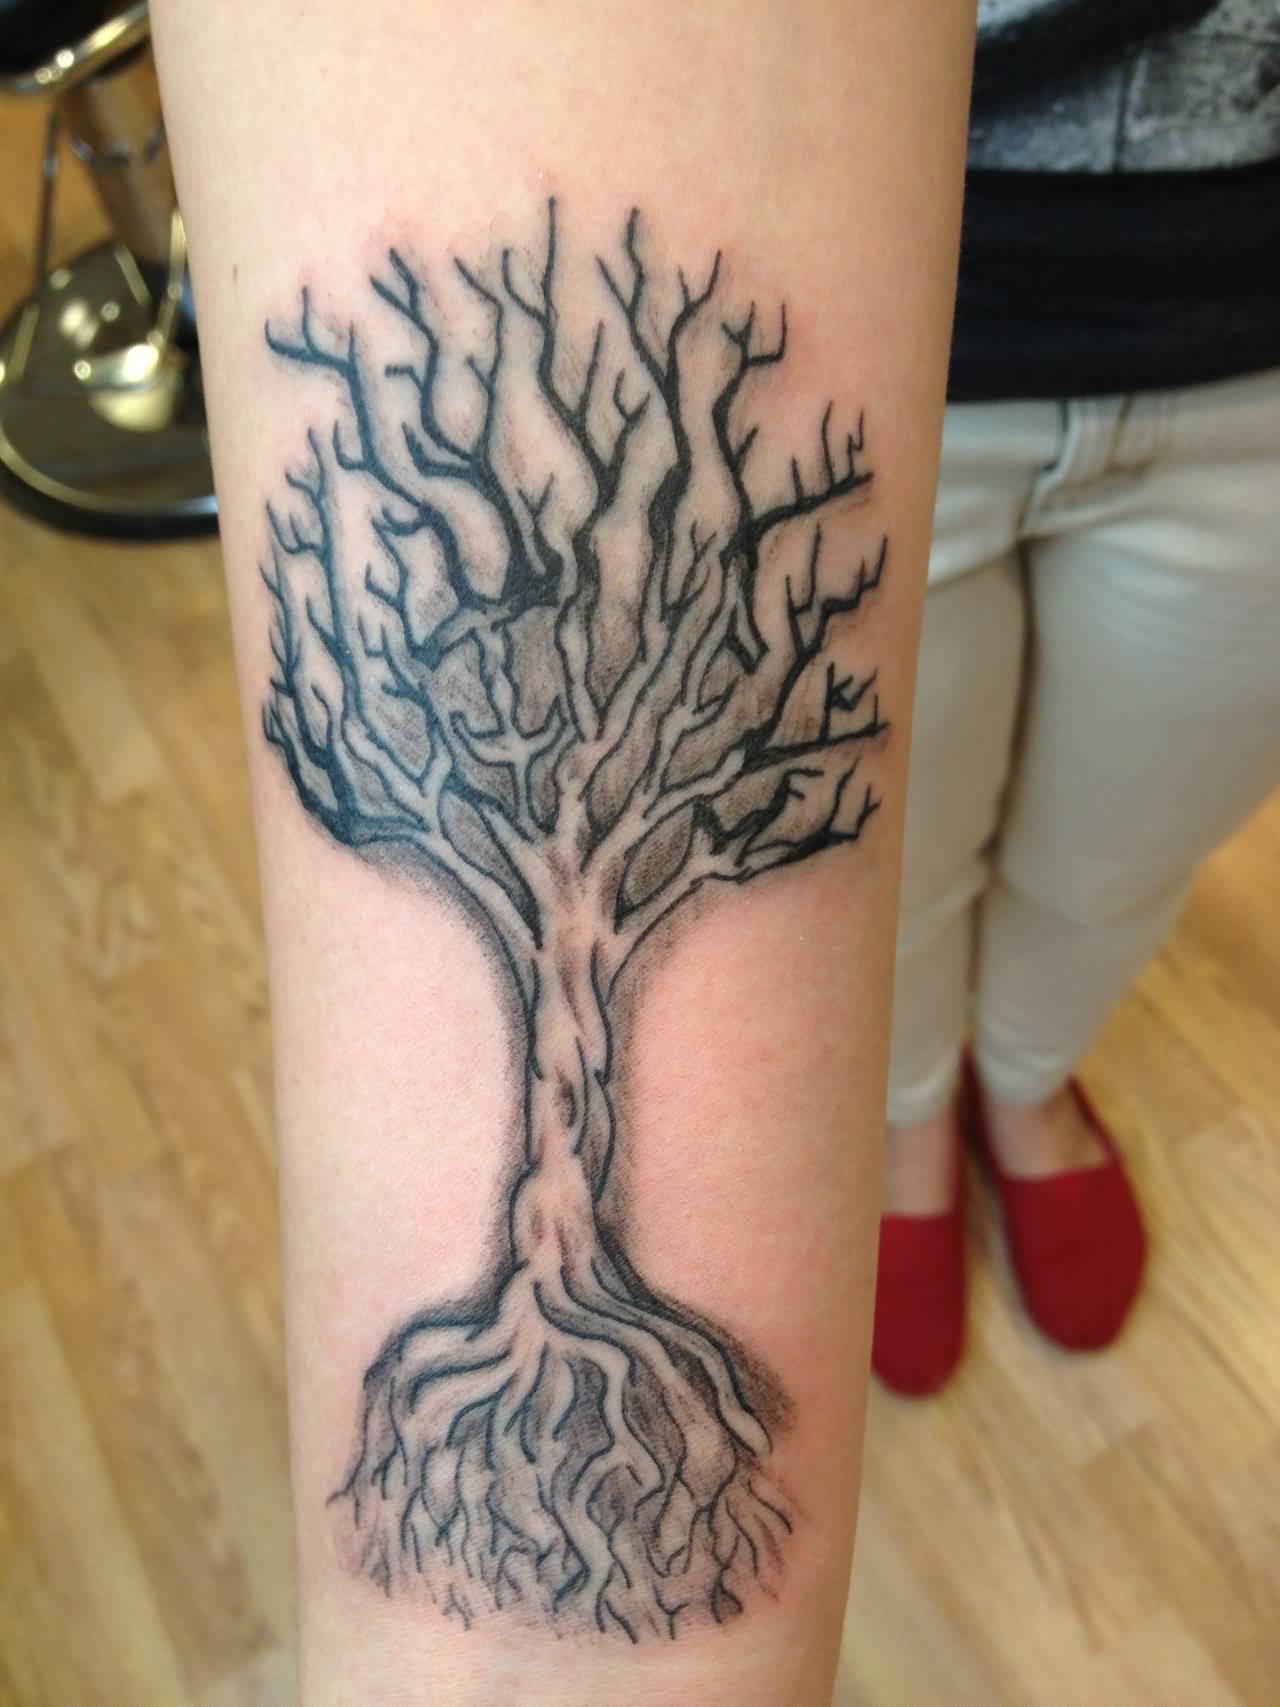 Black Ink Tree Of Life Without Leaves Tattoo Design For Forearm